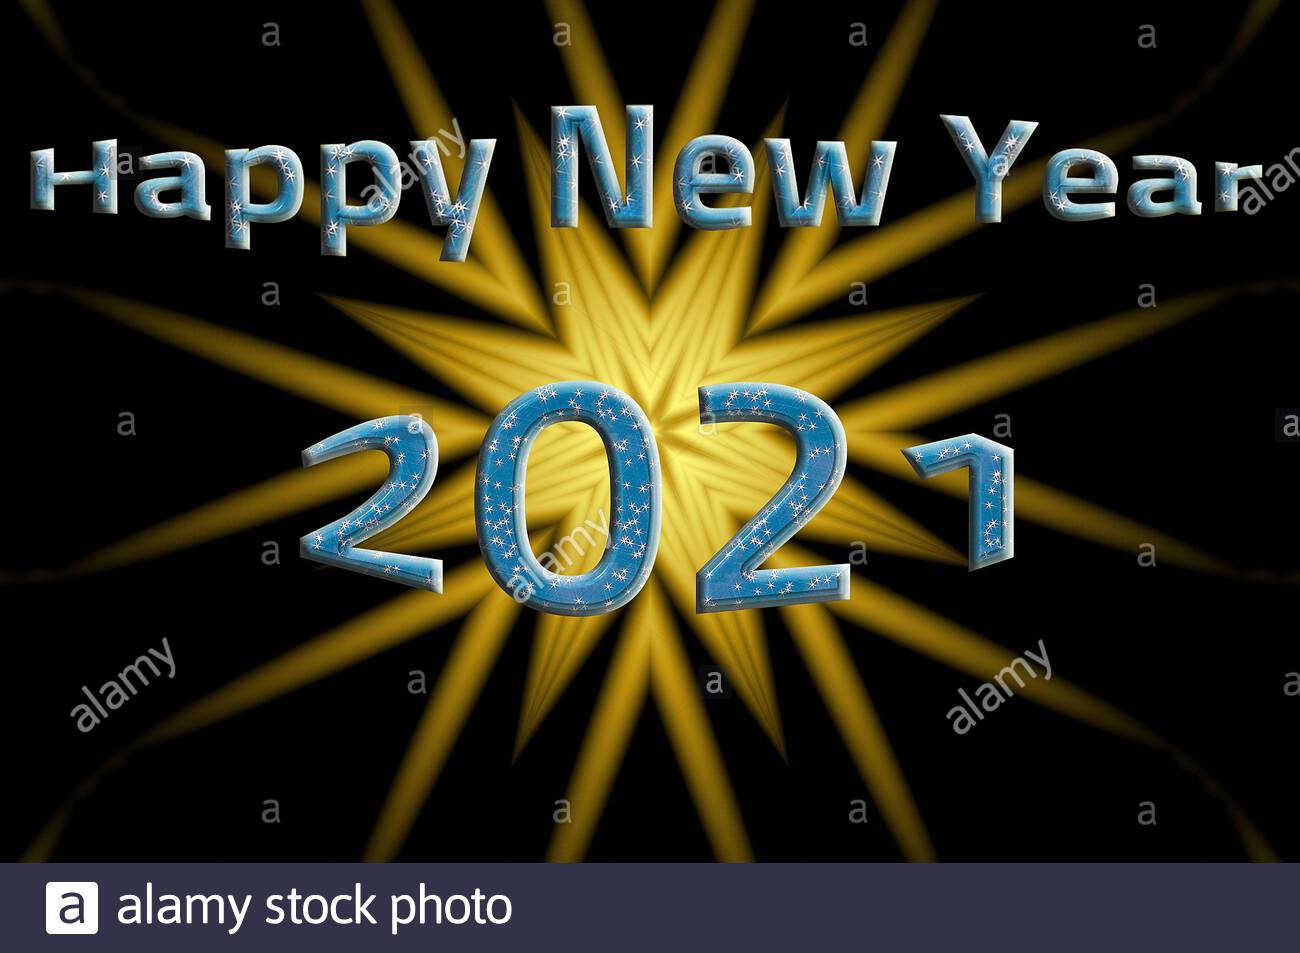 Happy New Year 21 Wallpaper Full Of Colors Background With Nice Geometric Patterns 21 Year Concept Happy New Year 21 Elegant Card Stock Photo Alamy